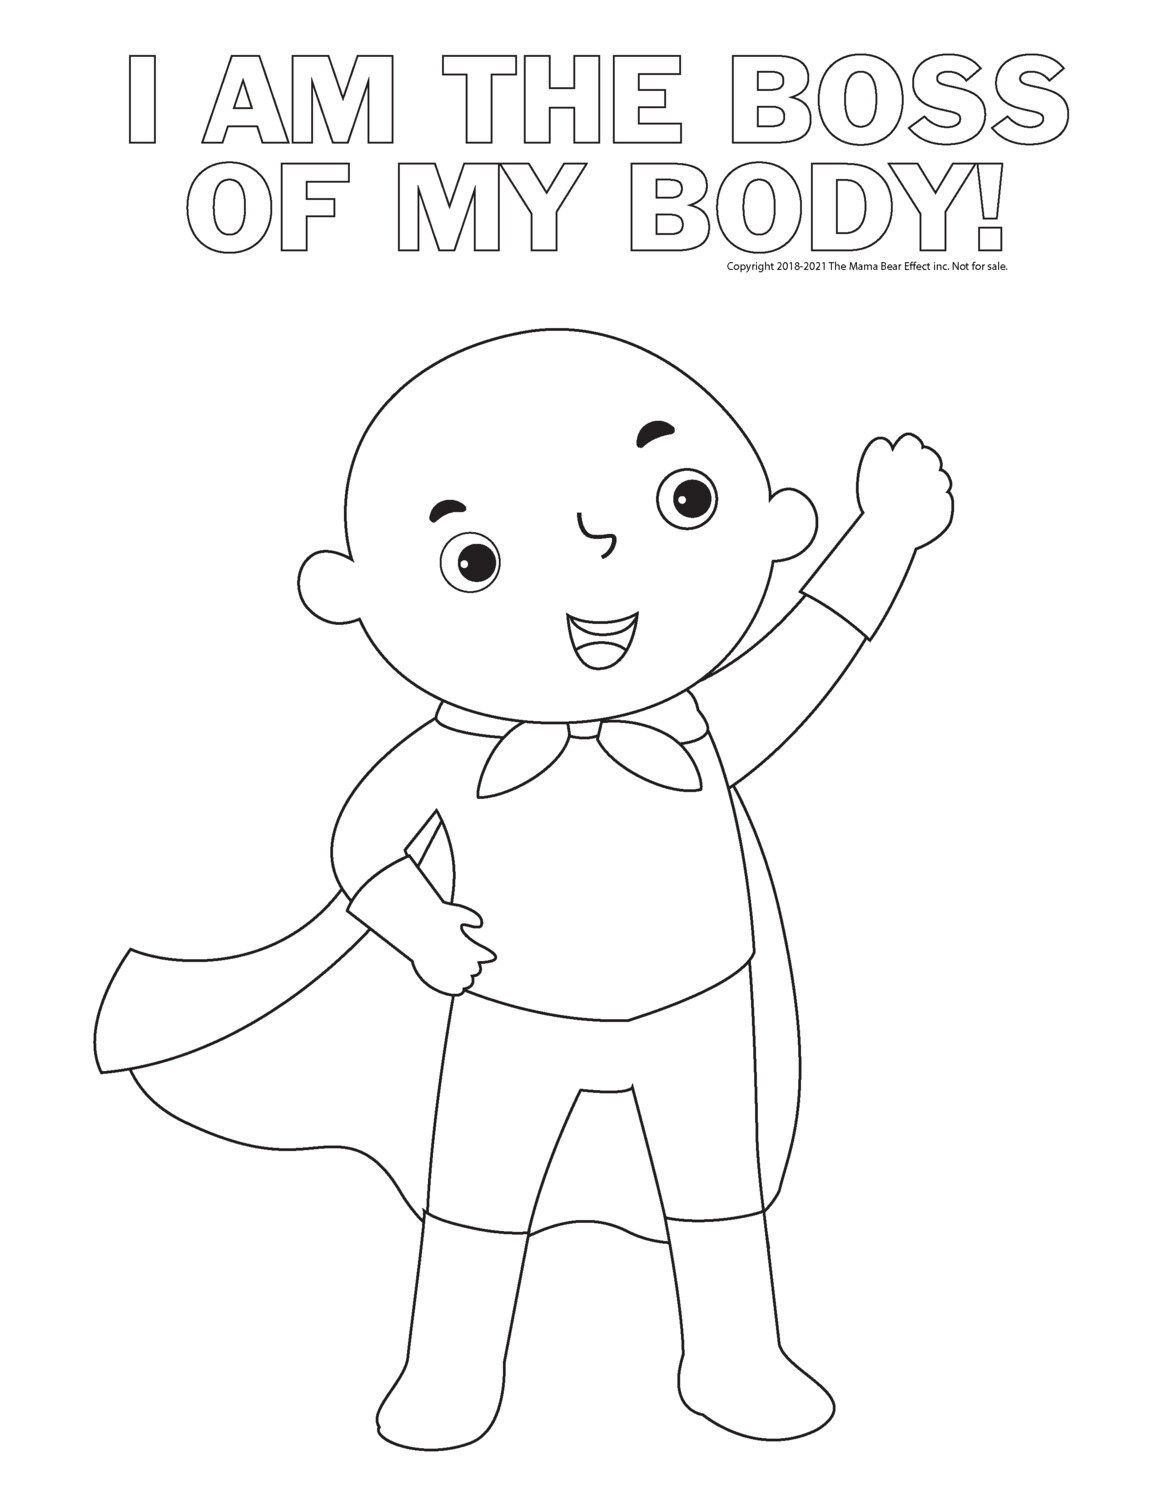 Boss of My Body Coloring Pages Set English - Digital Download